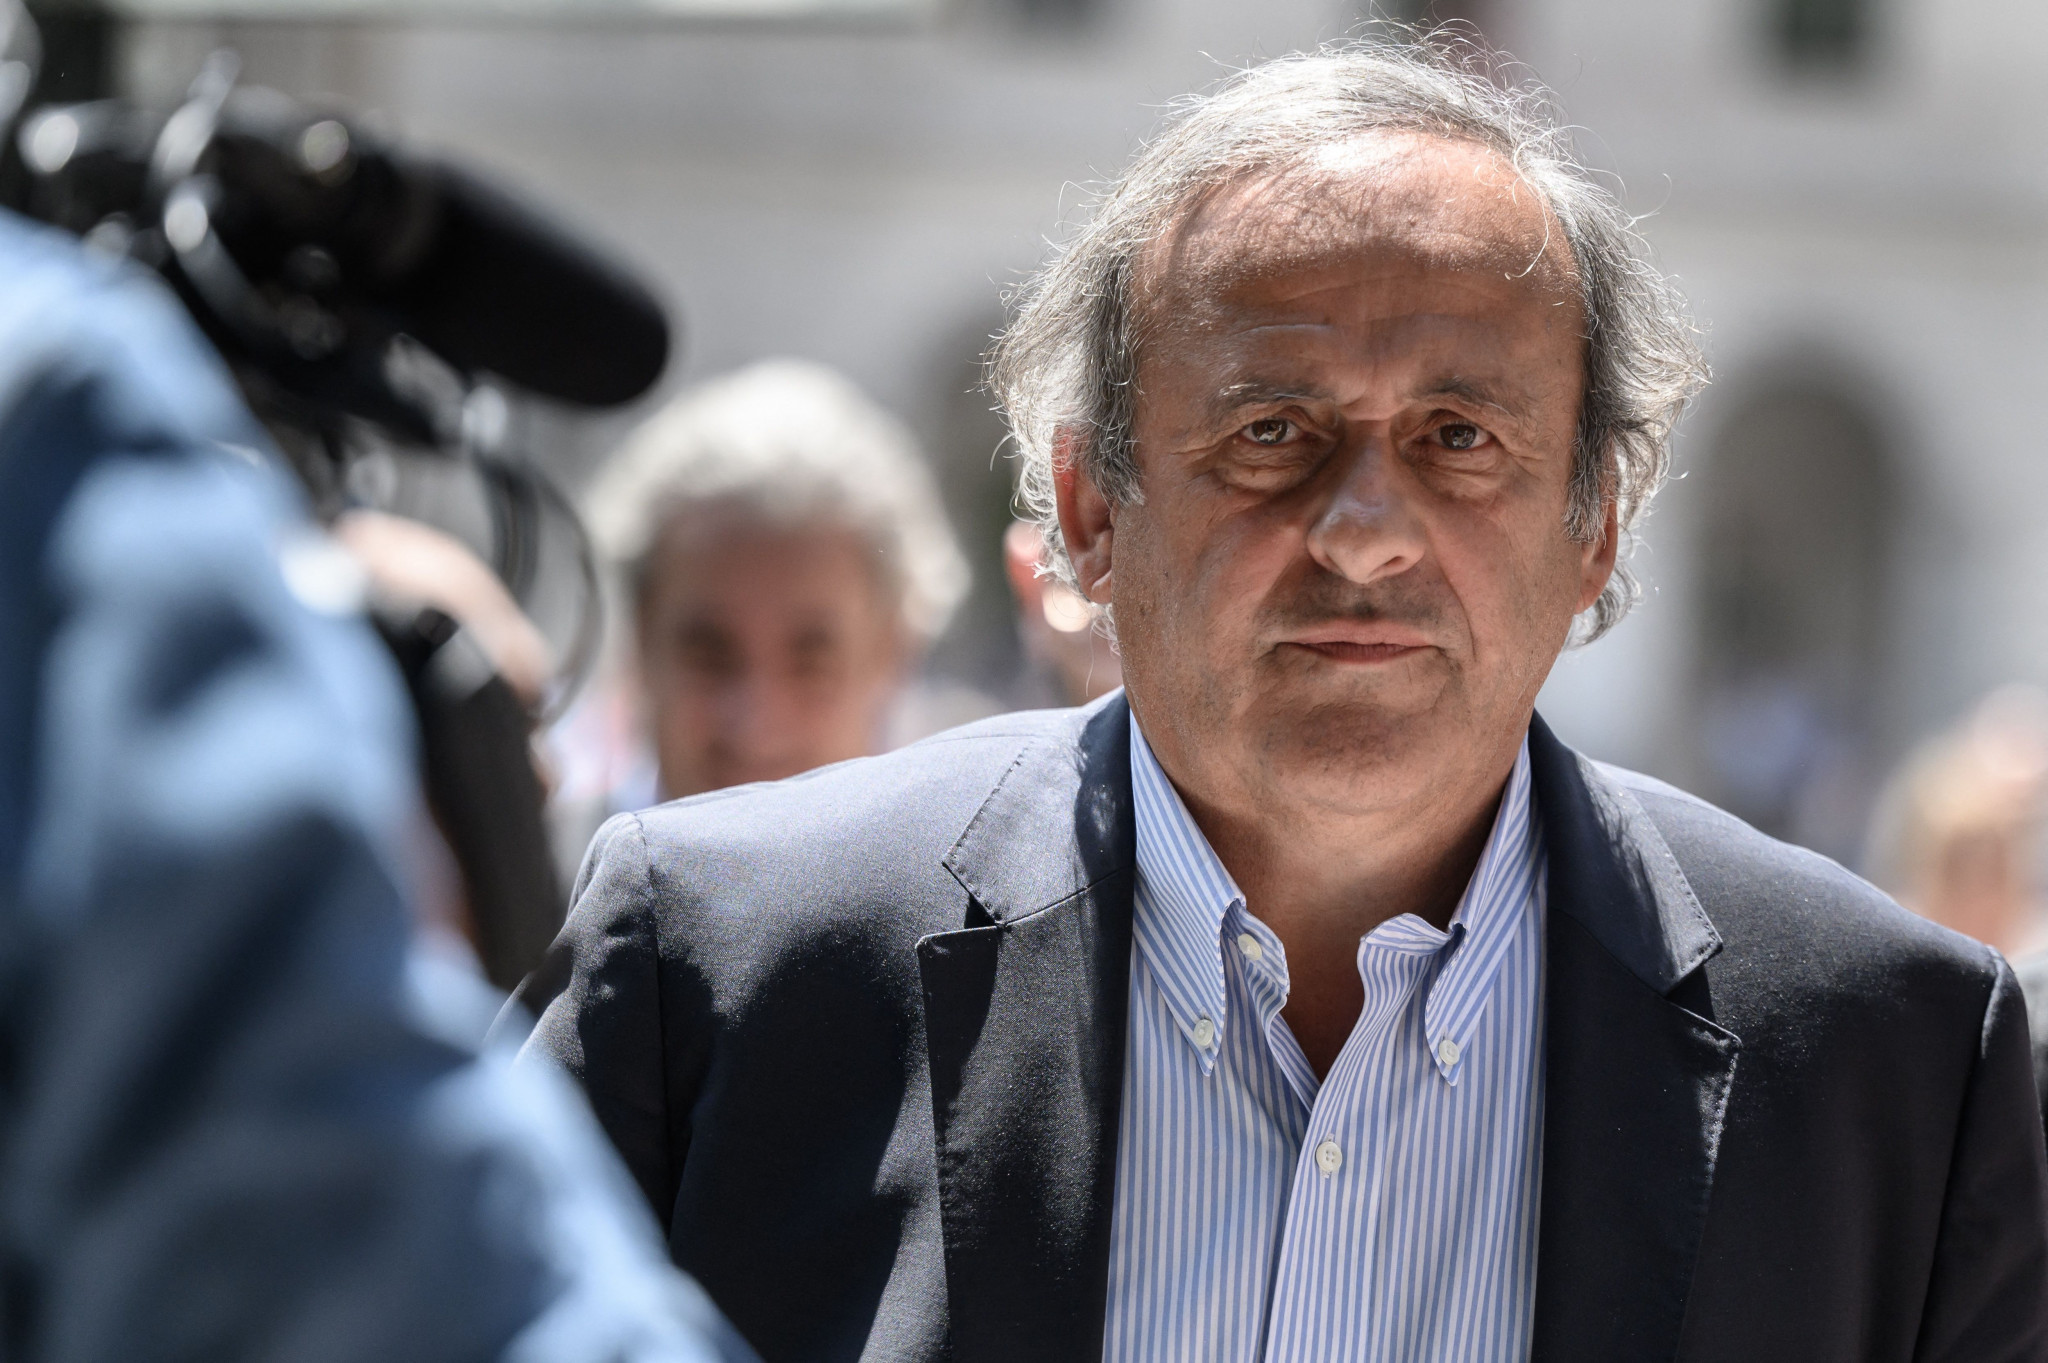 Platini lodges complaint about computer hacking in connection with Qatar 2022 corruption claims